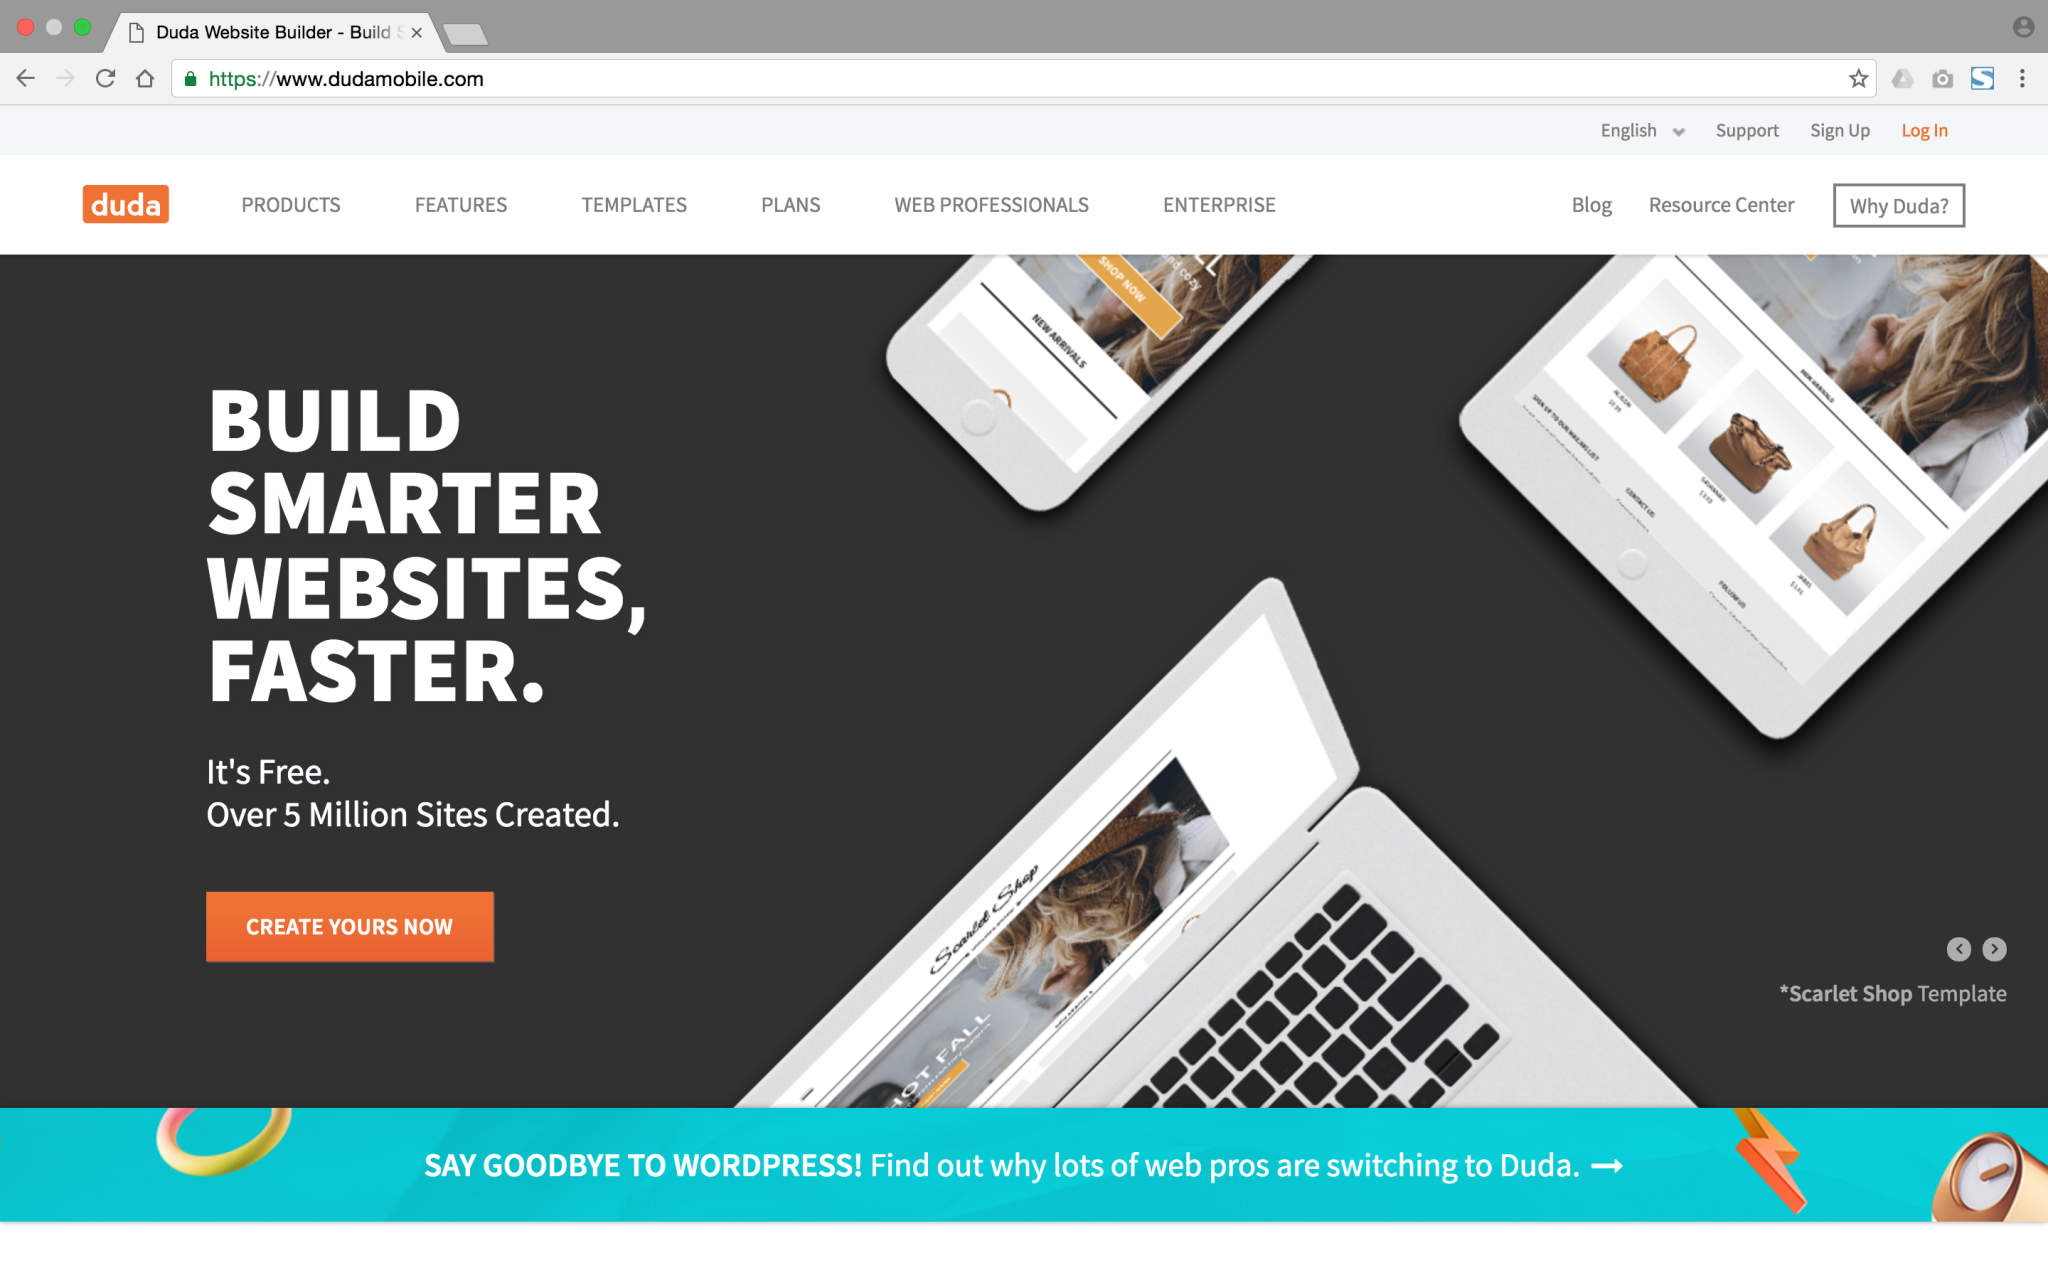 Website Builders For Startups And Small Businesses